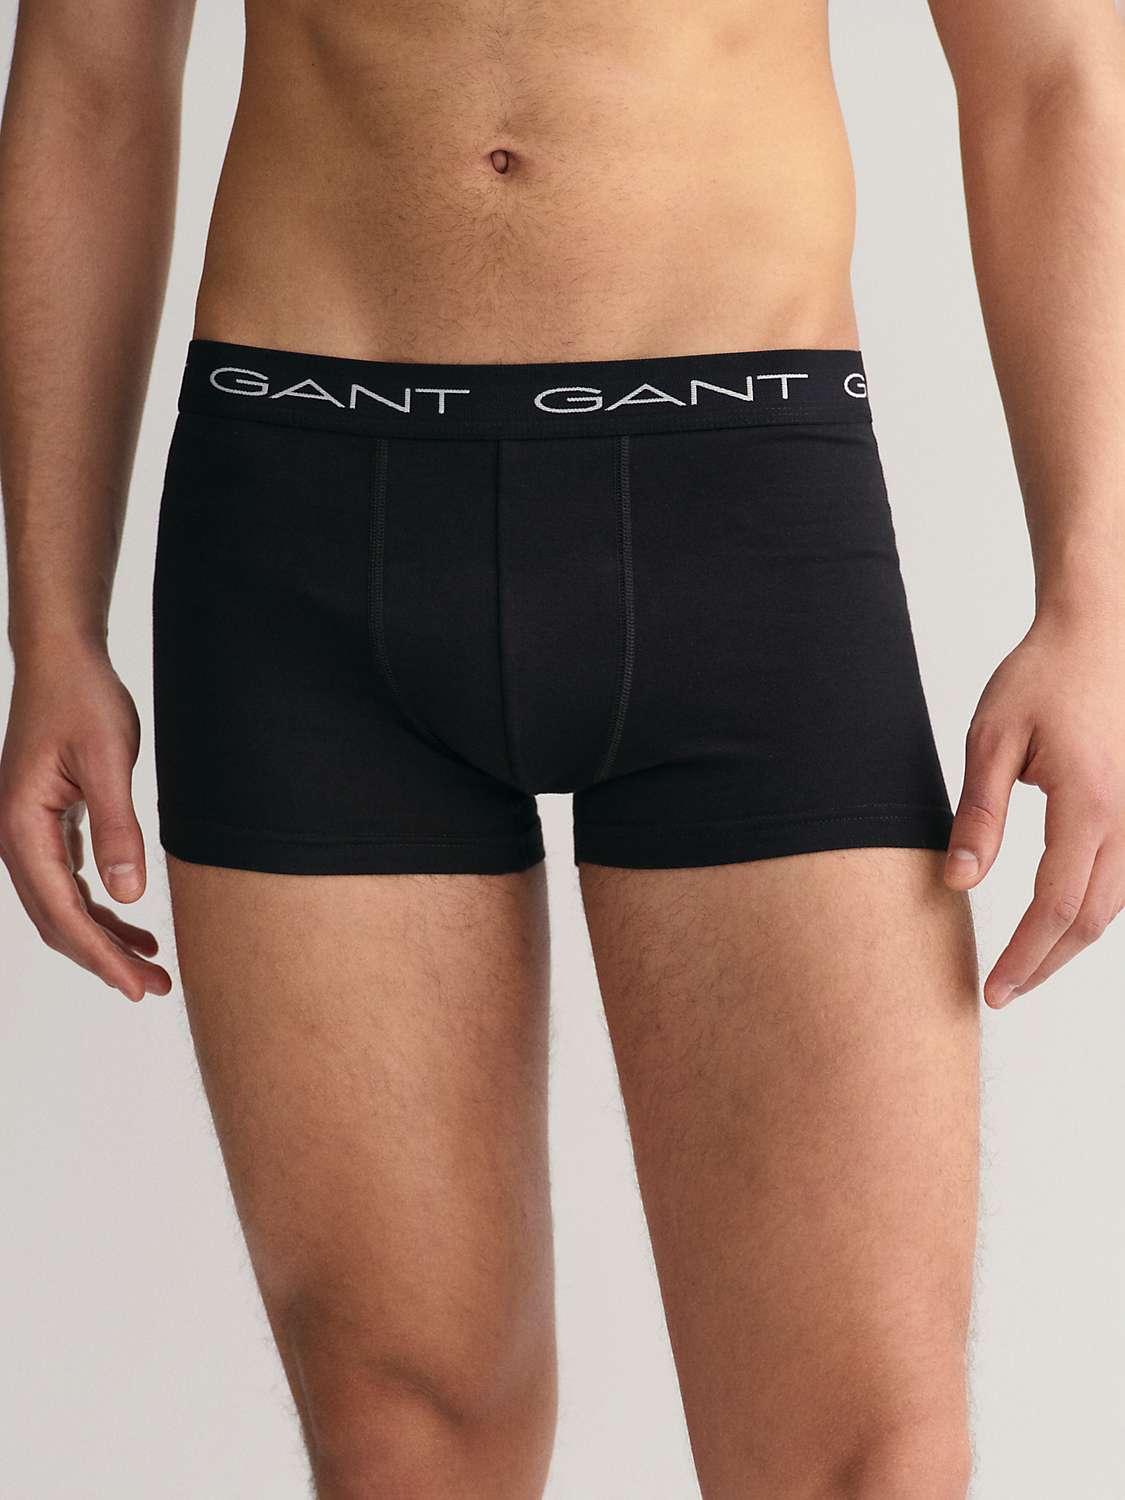 Buy GANT Cotton Stretch Jersey Trunks, Pack of 3 Online at johnlewis.com